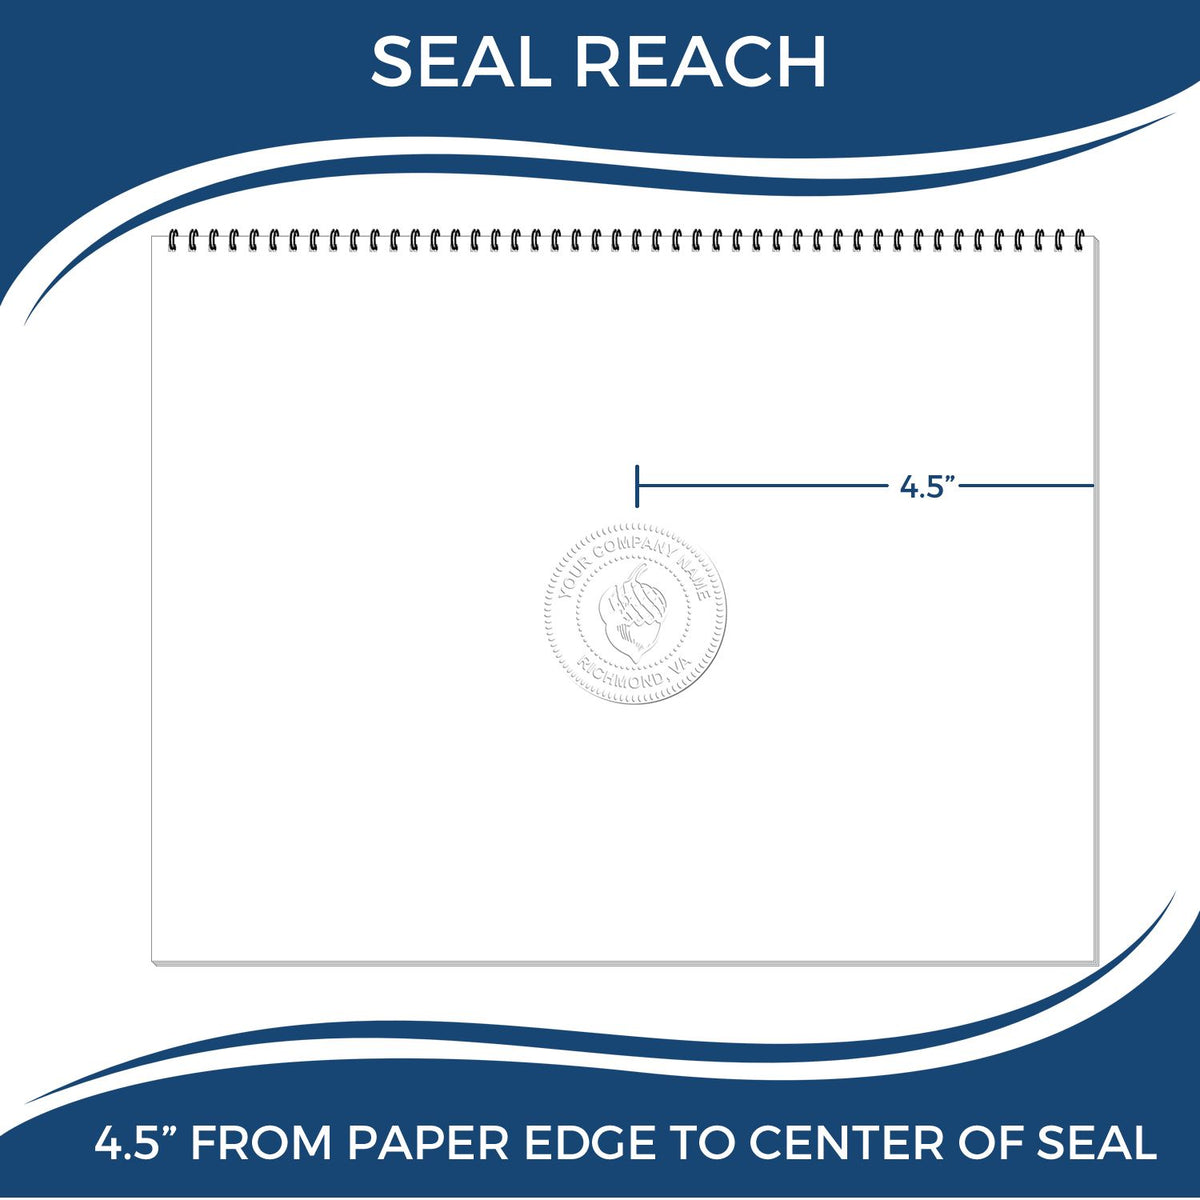 An infographic showing the seal reach which is represented by a ruler and a miniature seal image of the State of Michigan Extended Long Reach Geologist Seal